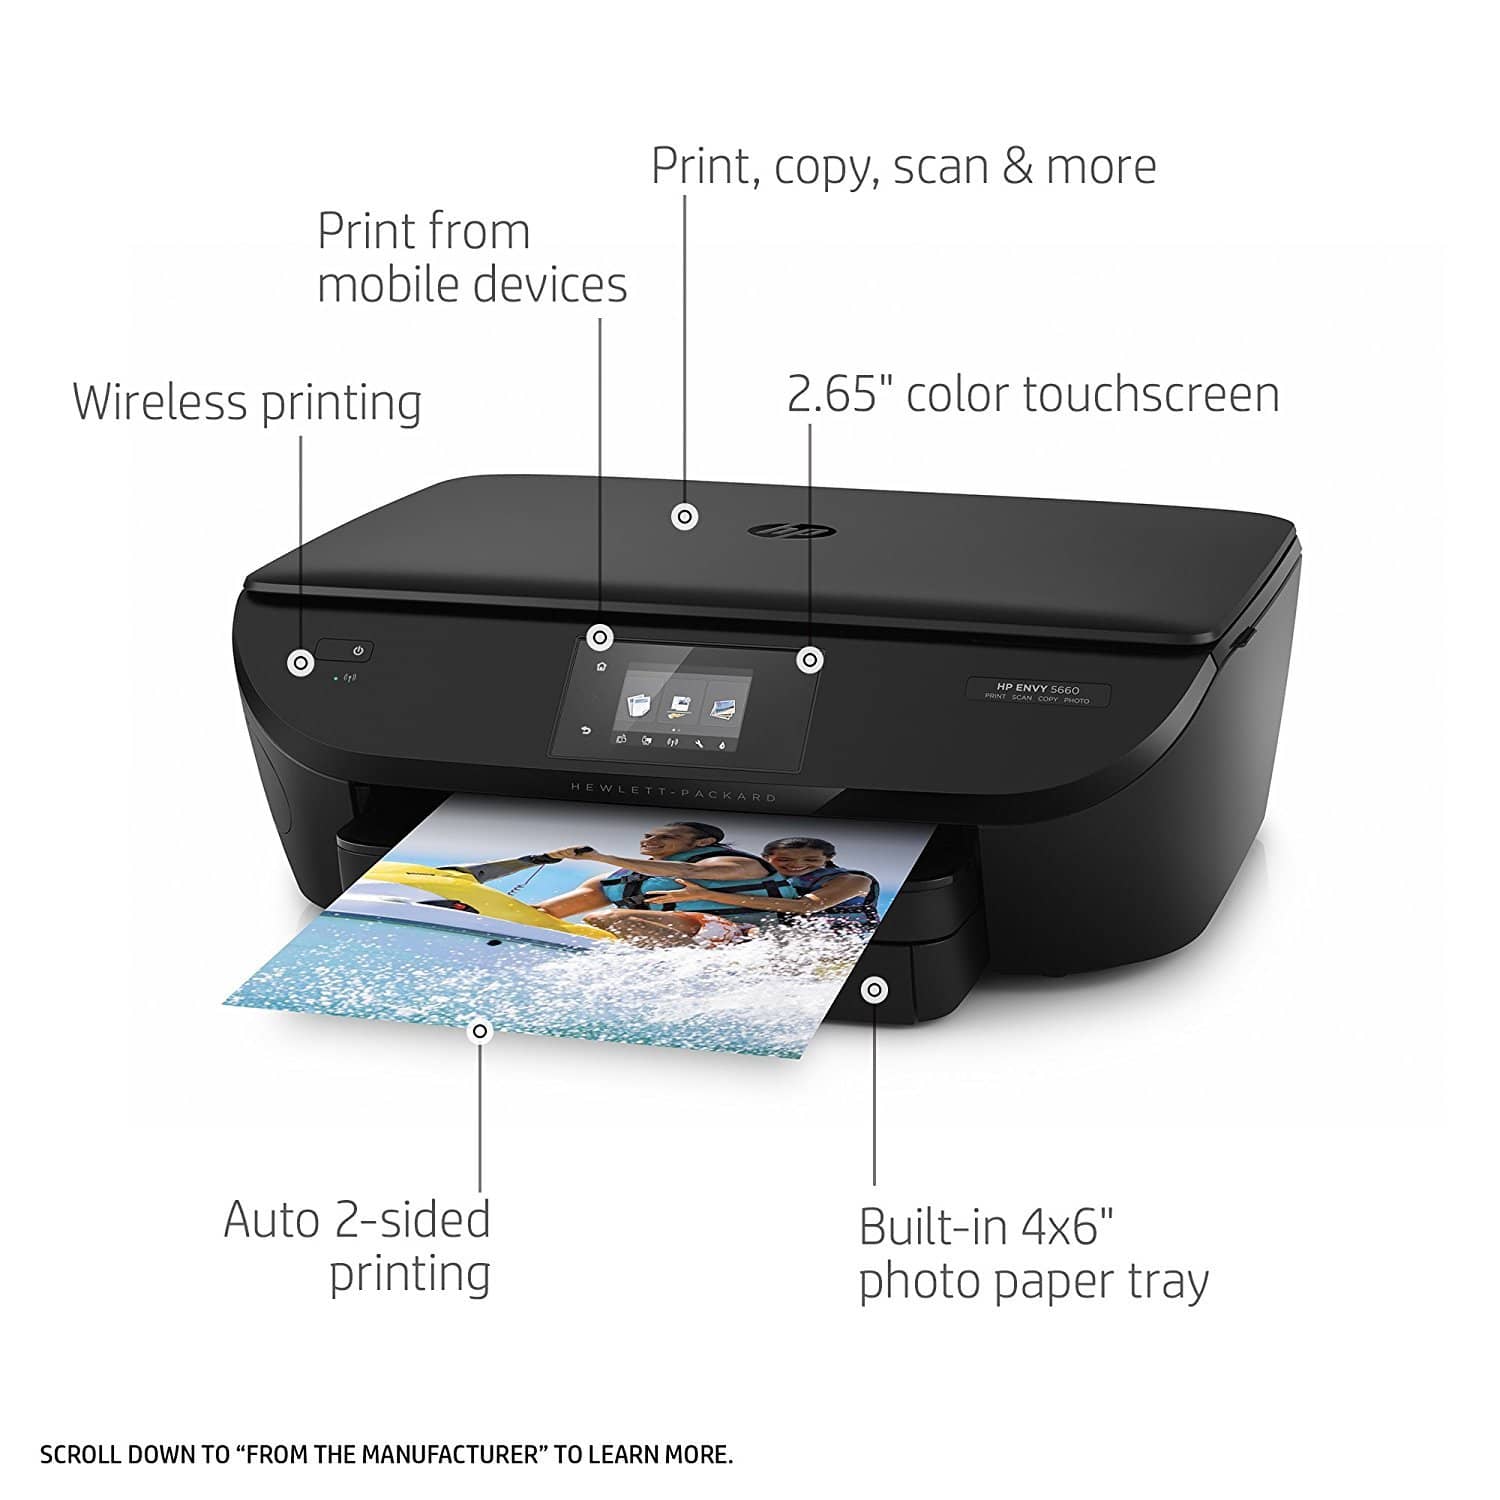 HP Envy 5660 Wireless All-in-One Photo Printer